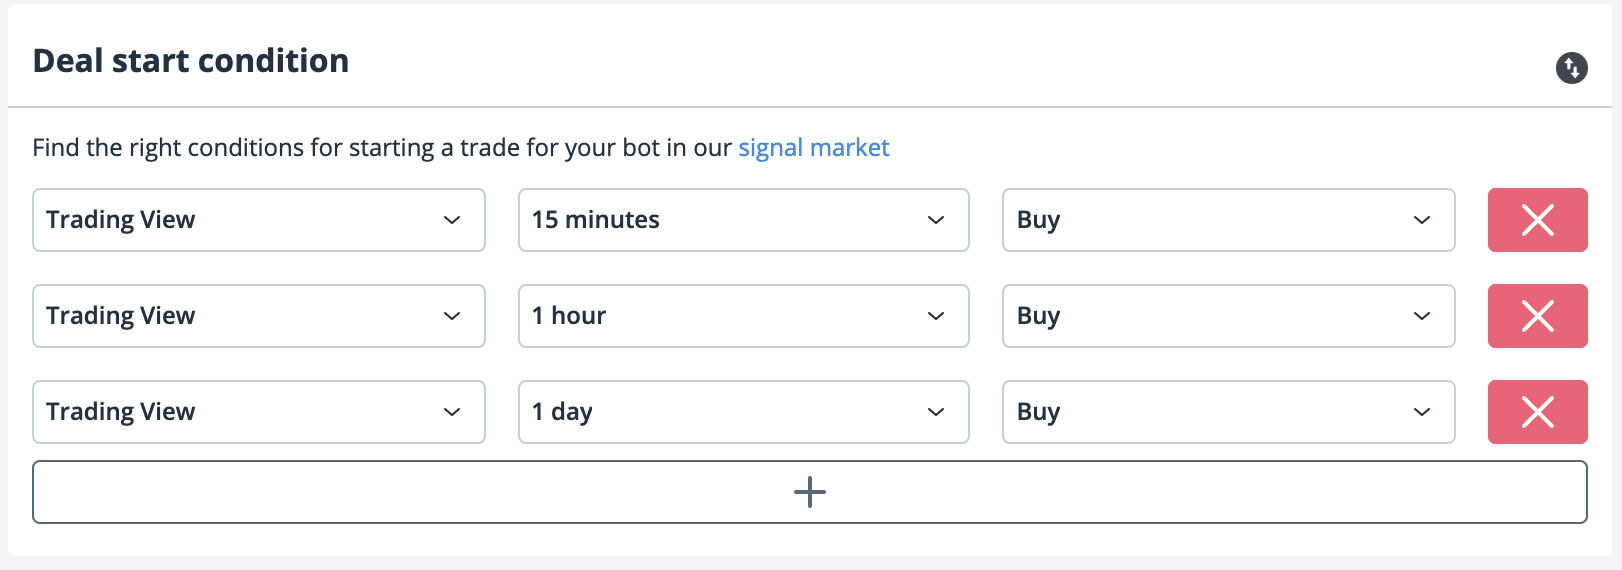 3Commas Review: Automated Trading Terminal & Crypto Trading Bots